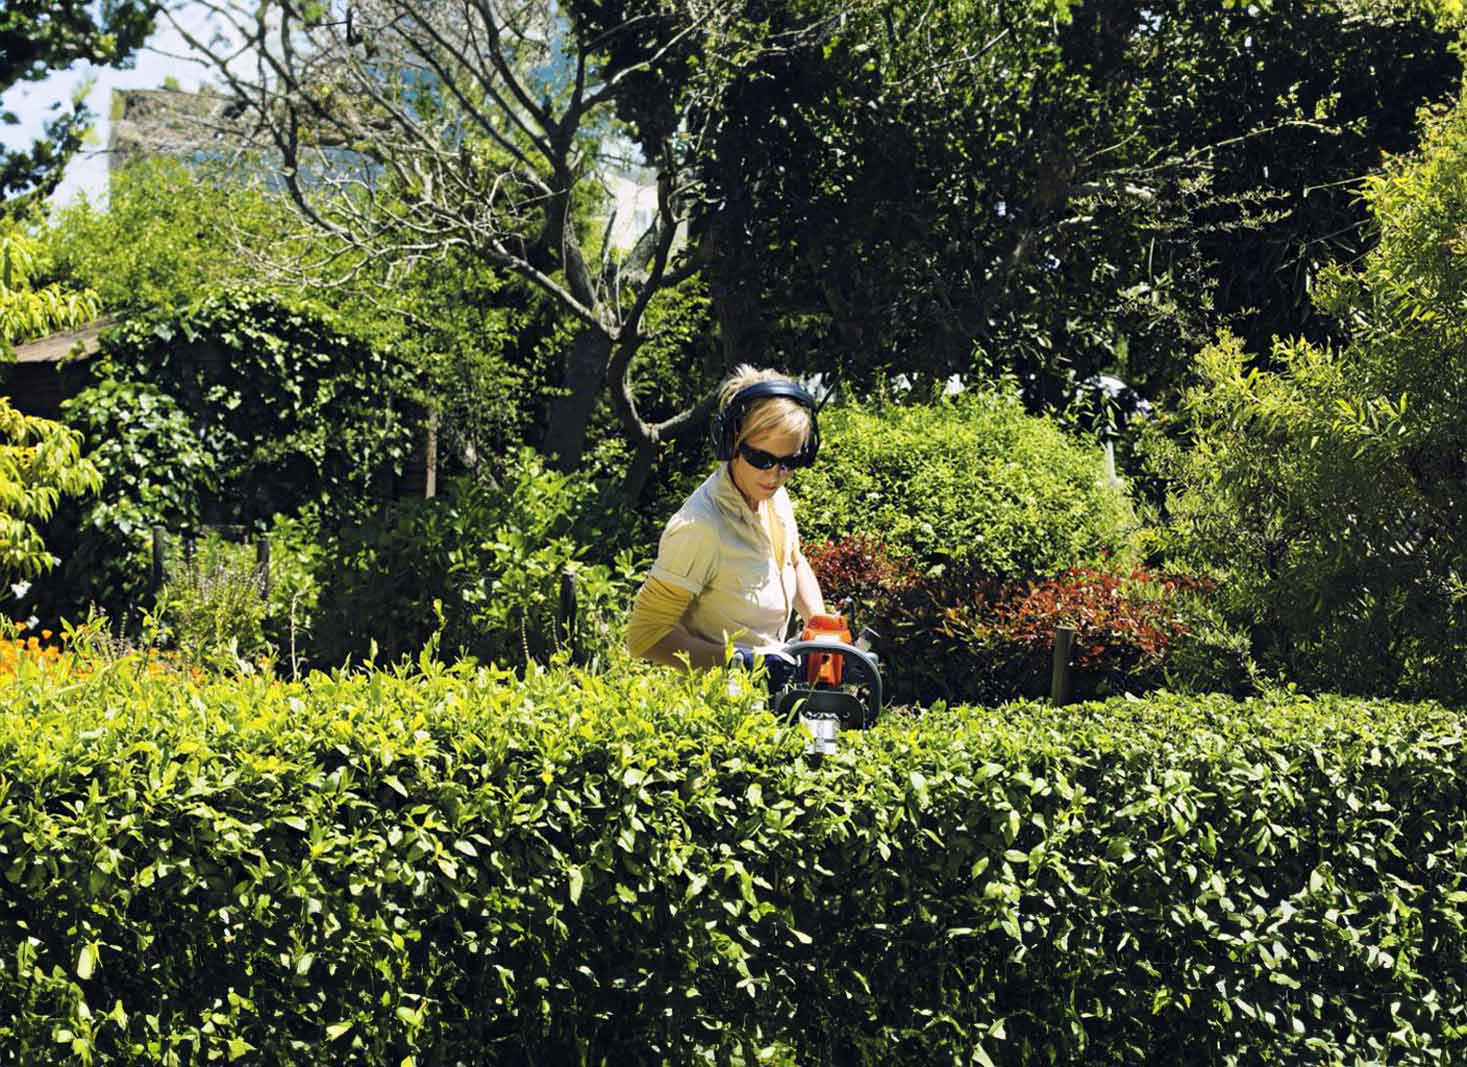 Why is it important to trim hedges